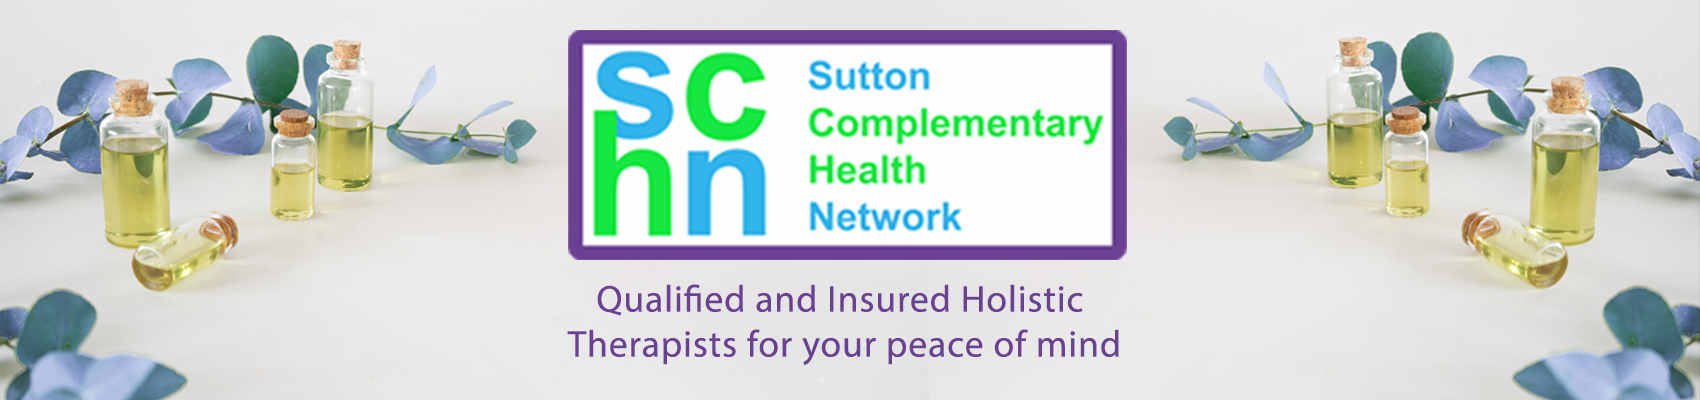 Sutton Complementary Health Network